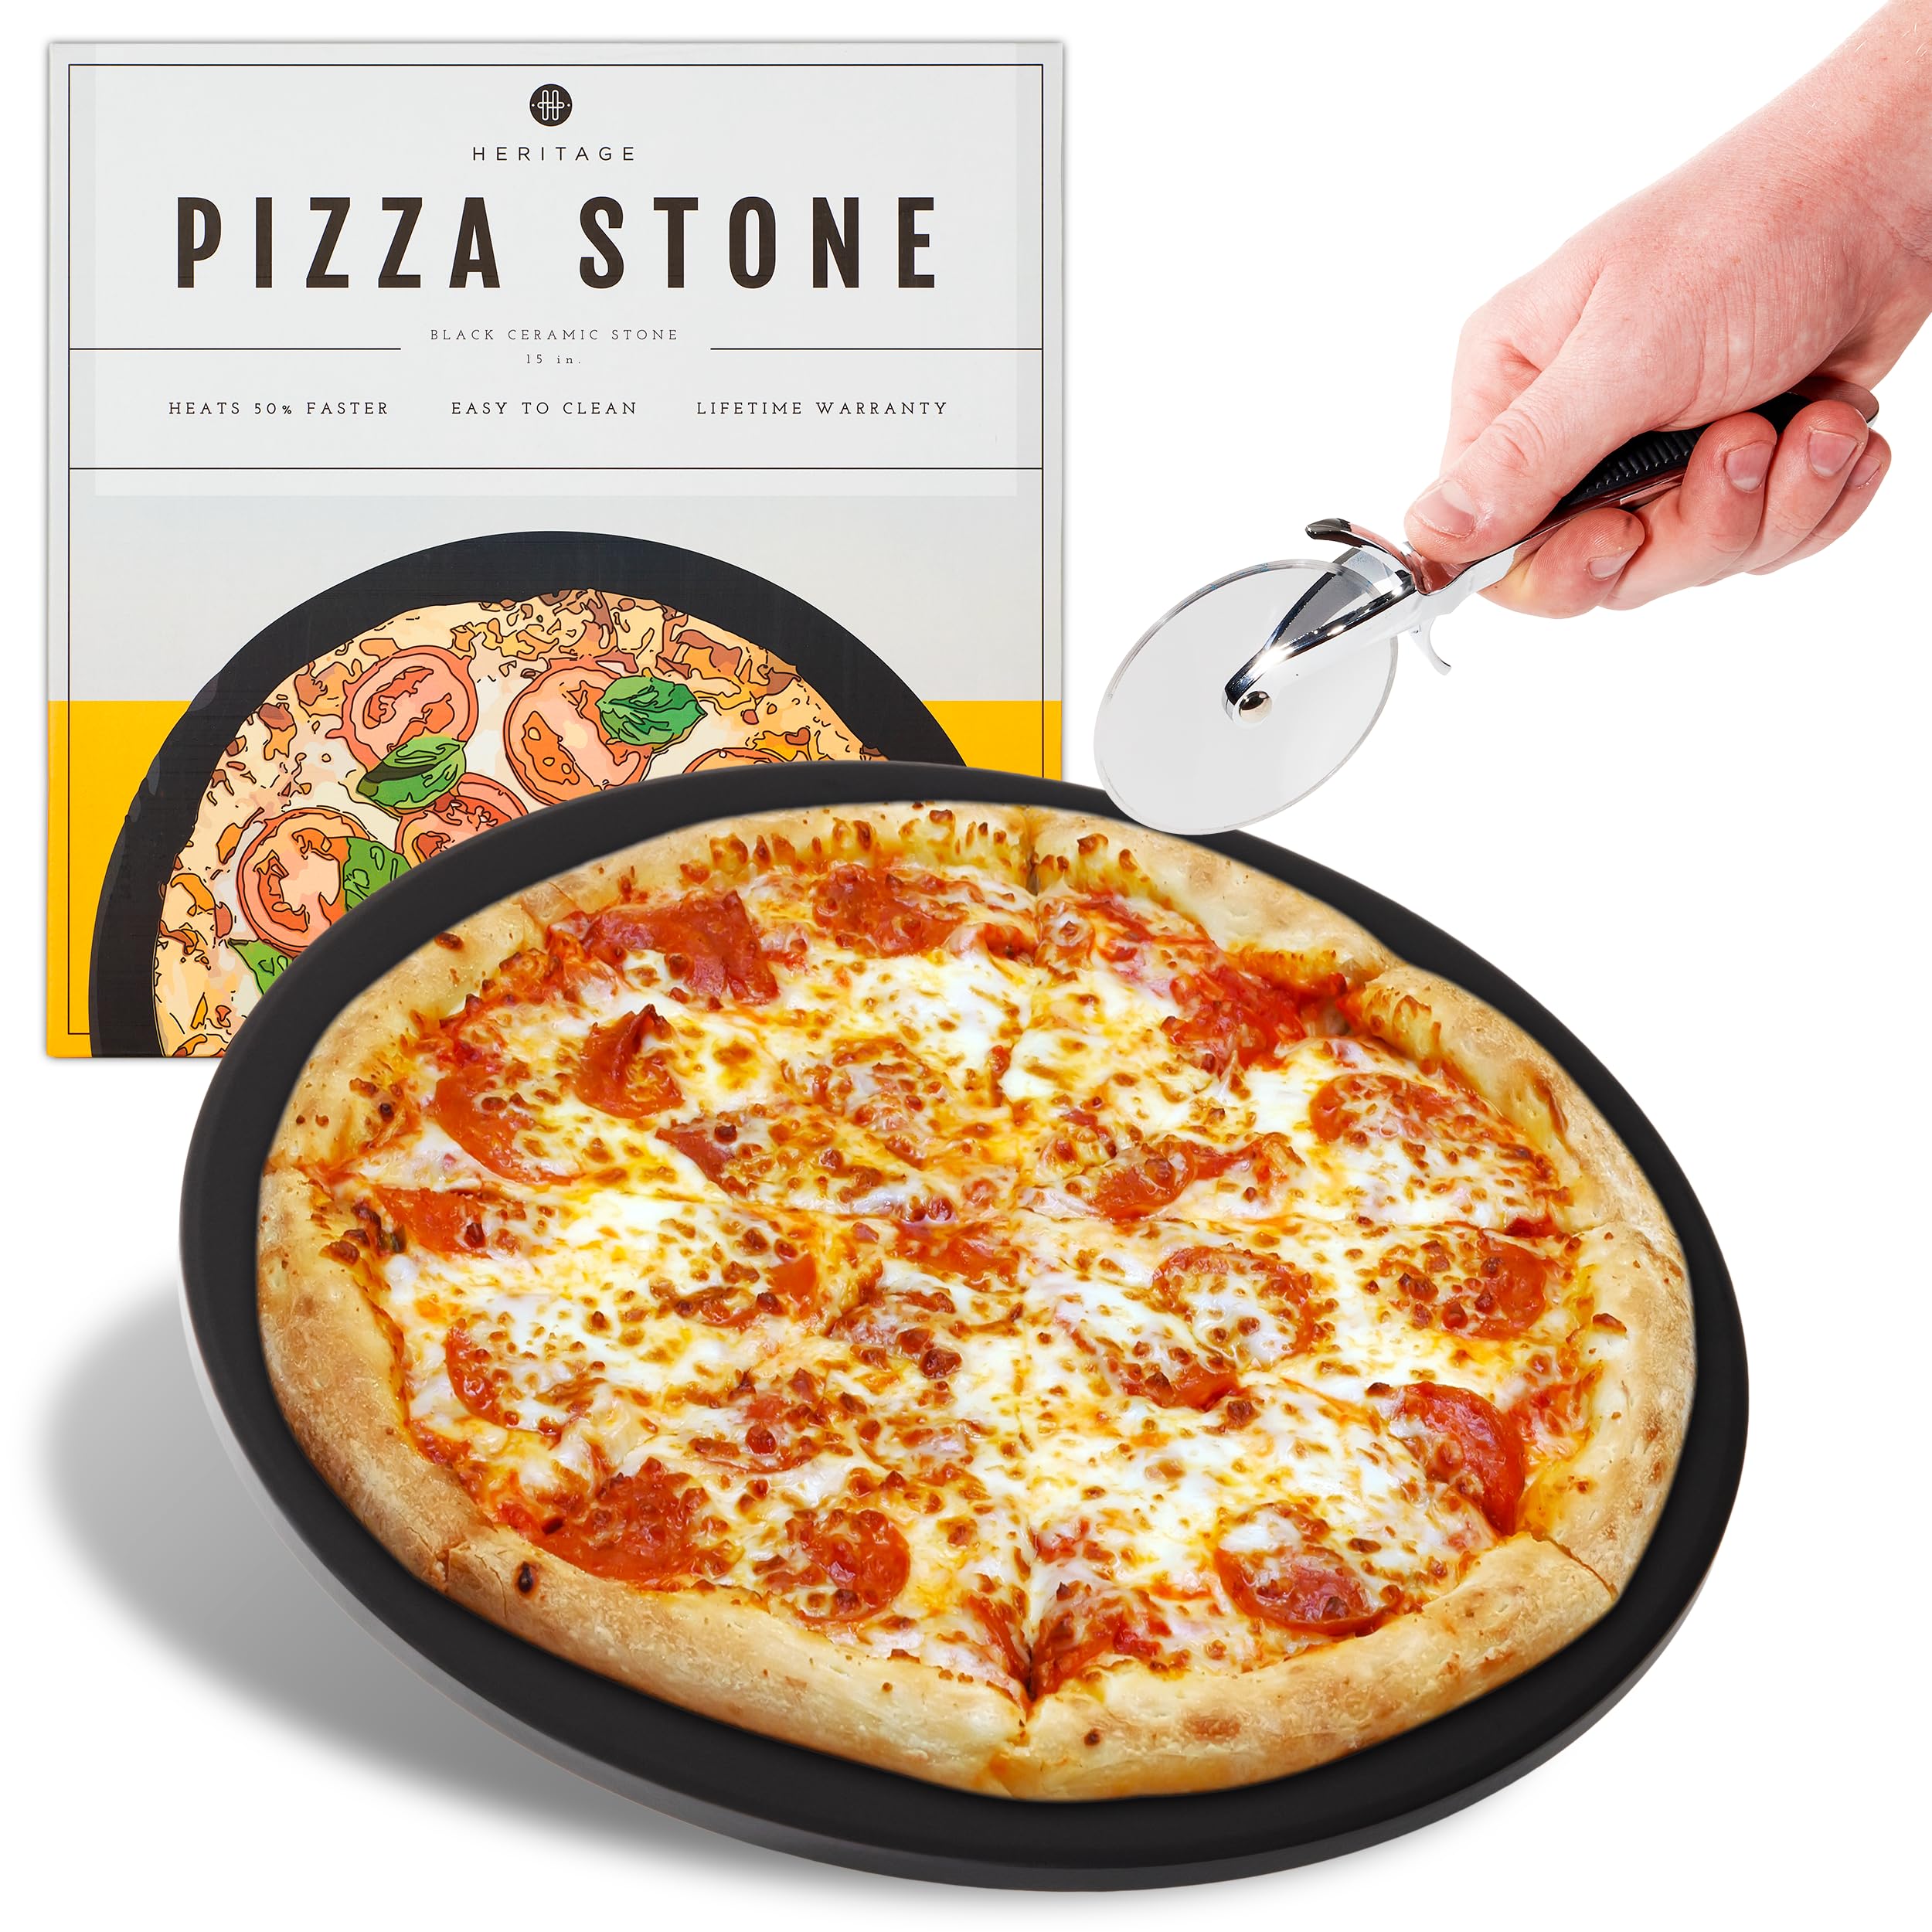 Heritage Pizza Stone, 15 inch Ceramic Baking Stones for Oven Use - Non-Stick, No Stain Pan & Cutter Set for Gas, BBQ & Grill - Kitchen Accessories & Housewarming Gifts w/Bonus Pizza Wheel - Black